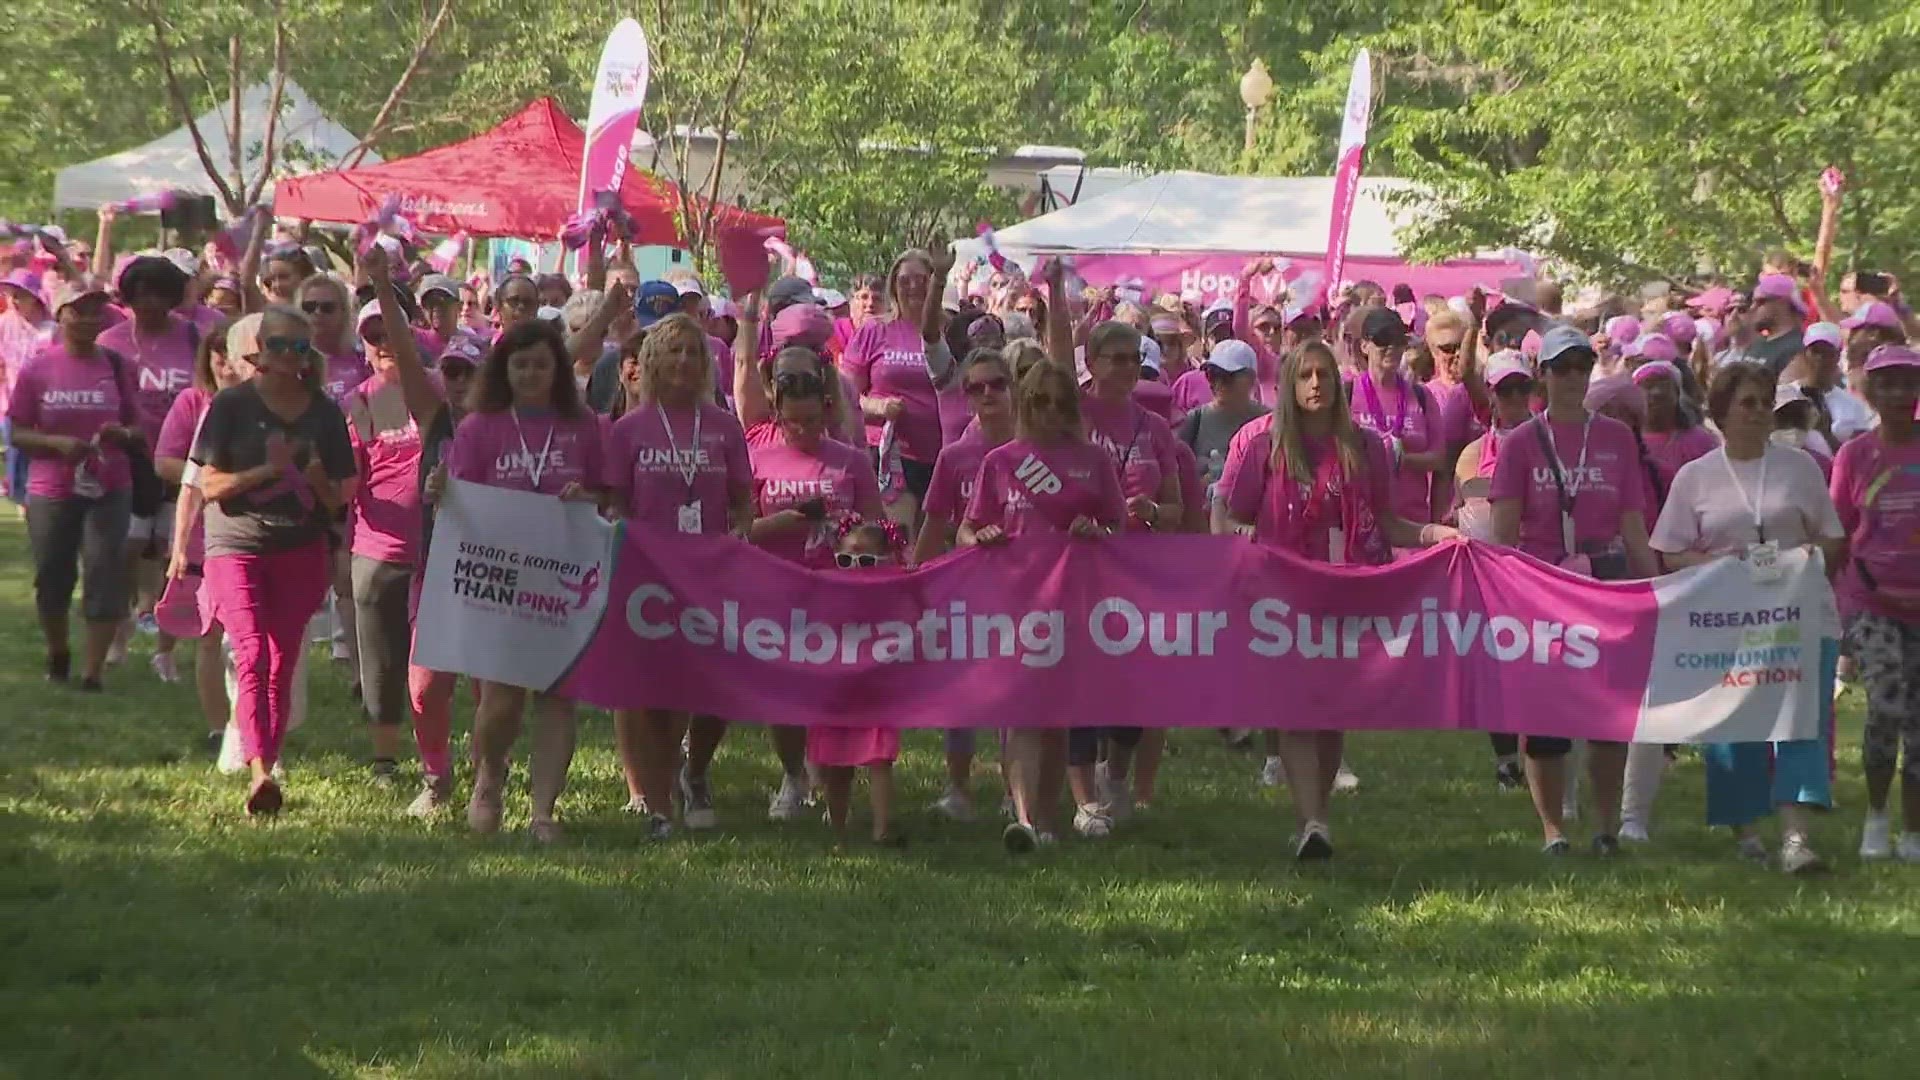 More than 2,500 people walked on Saturday to celebrate breast cancer survivors while also remembering the ones whose lives were cut short by the disease.